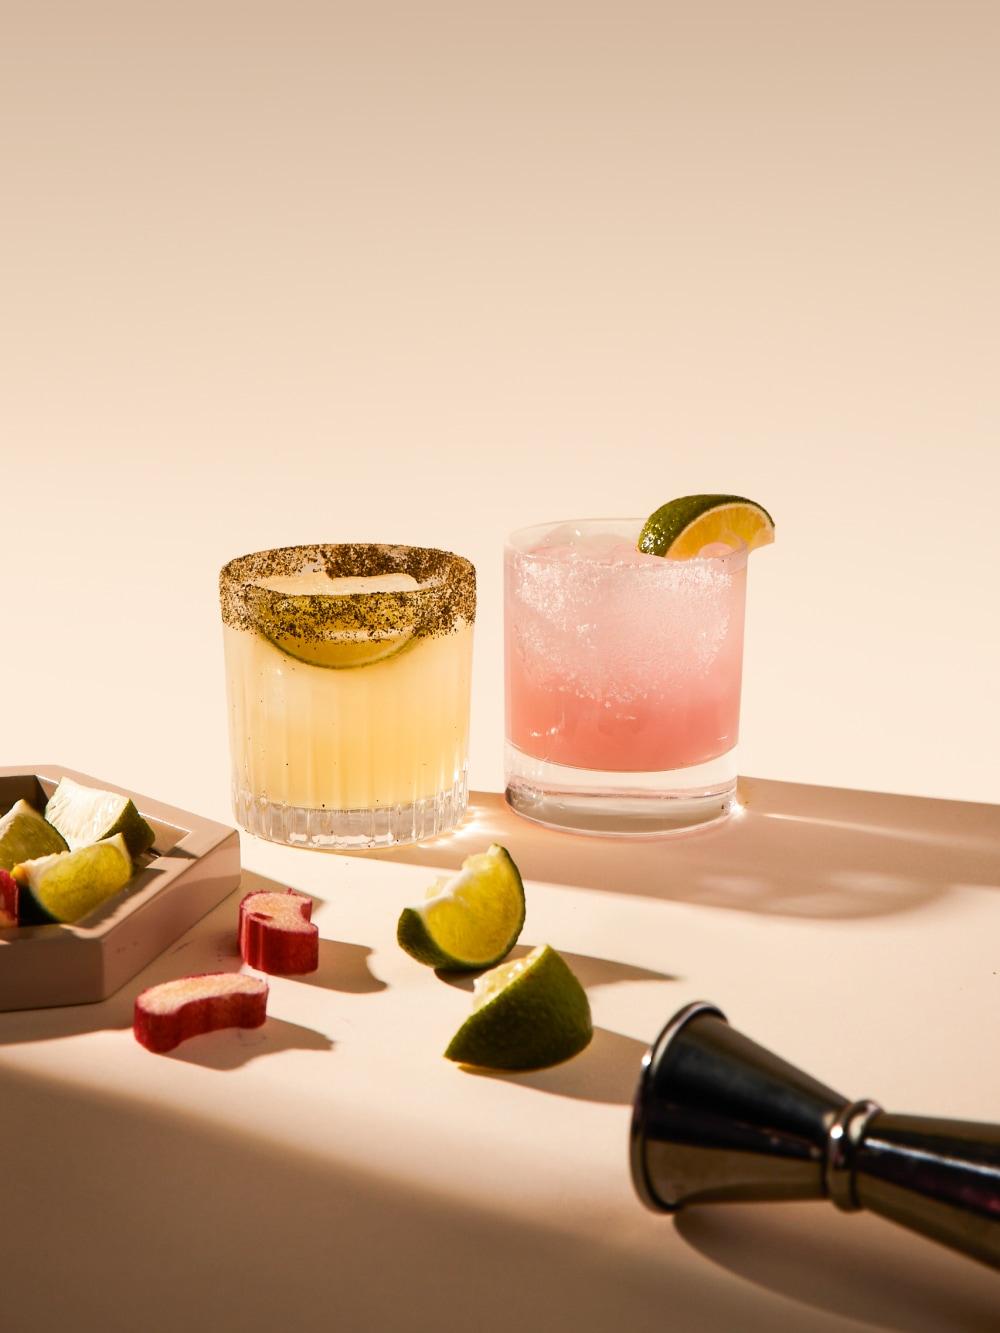 Celebrate with Margaritas, Mariachi, and Mexican-American Flavors